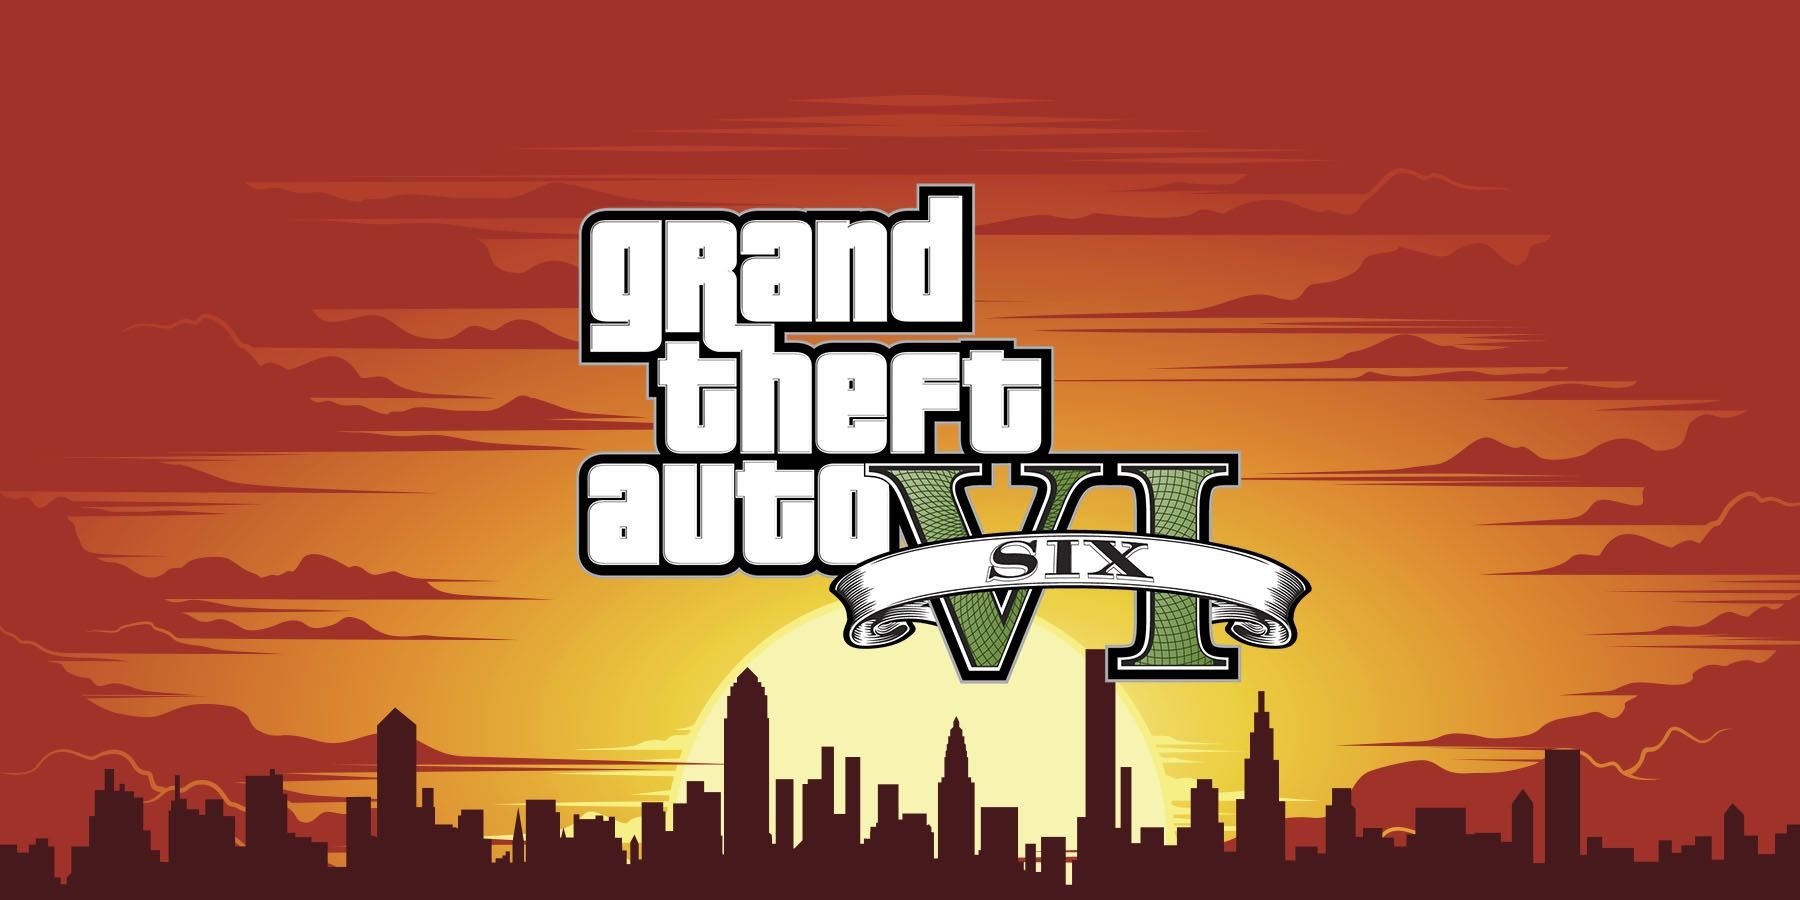 GTA 6 Release Date: Leaks and Hints 